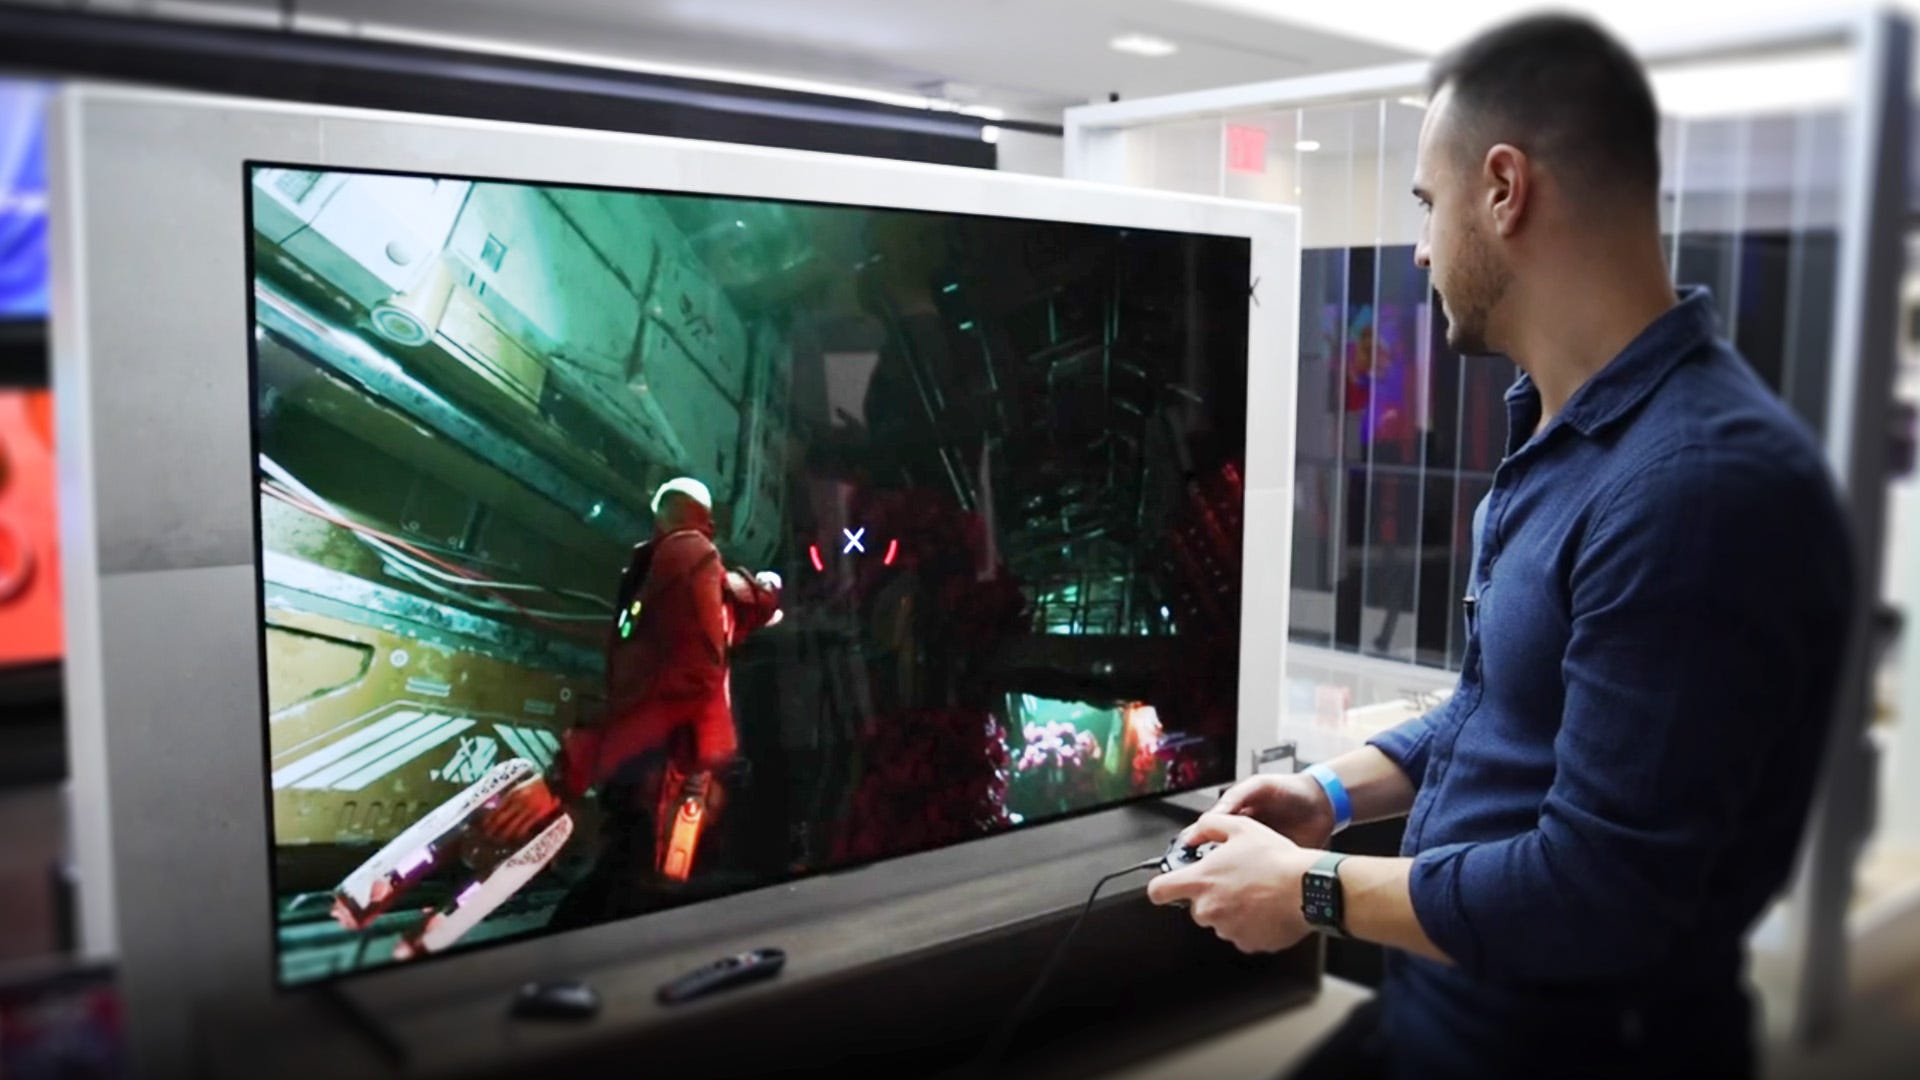 LG's new OLED gaming TV - Video - CNET